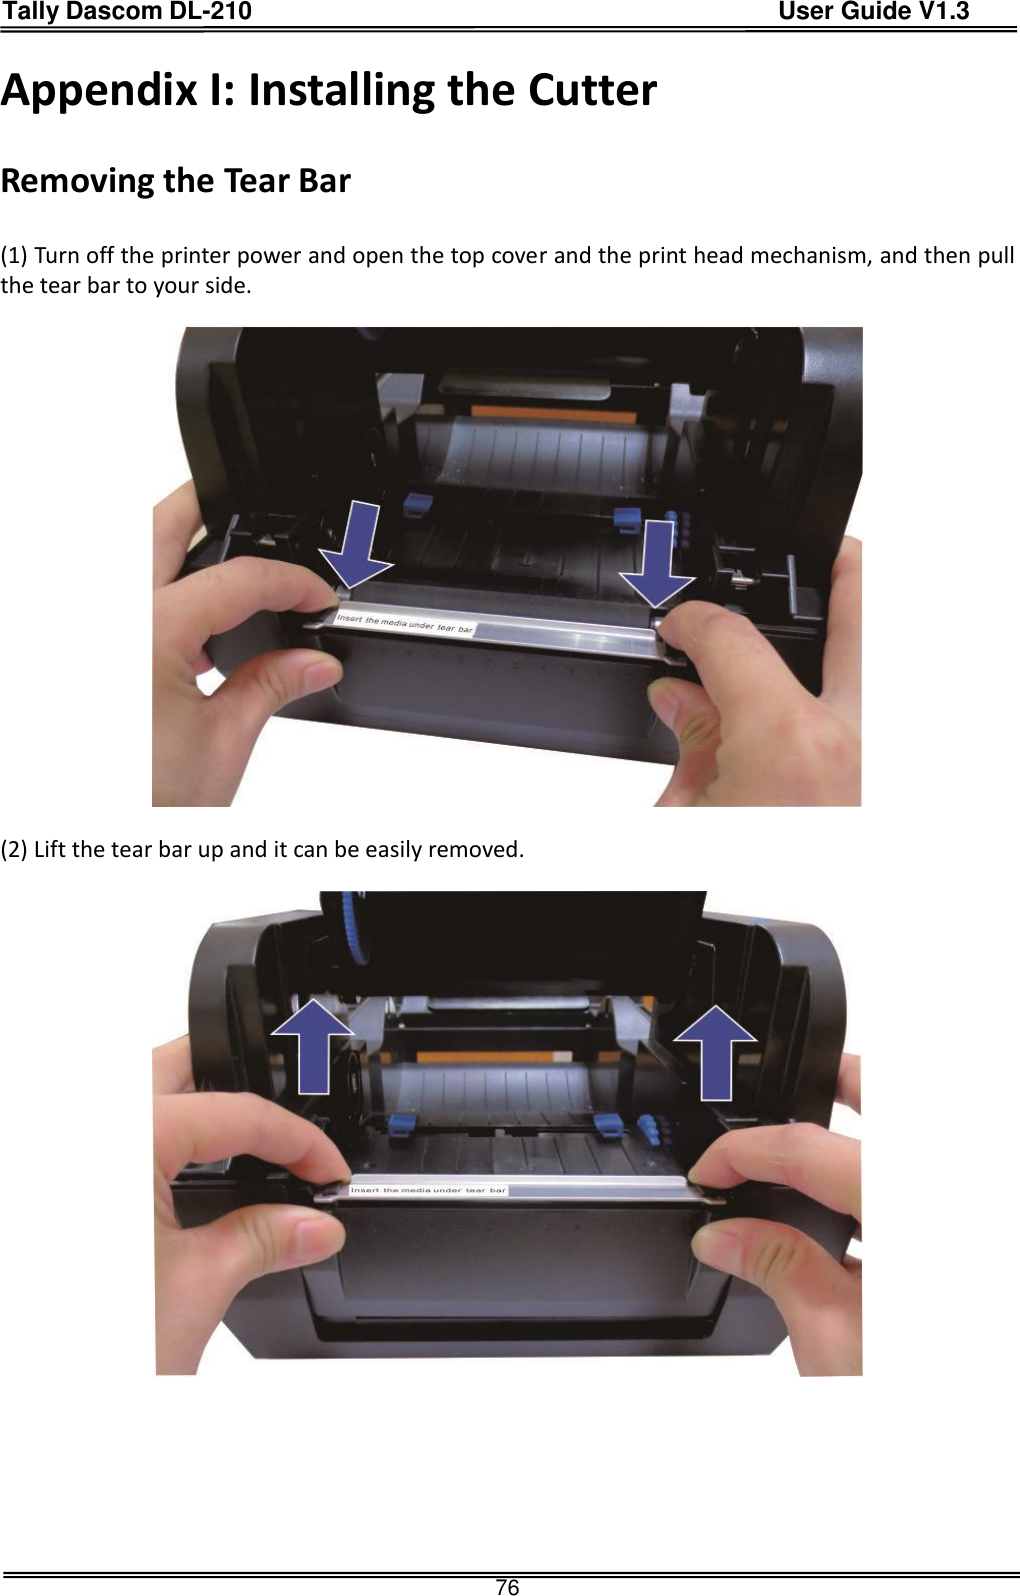 Tally Dascom DL-210                                          User Guide V1.3  76 Appendix I: Installing the Cutter  Removing the Tear Bar  (1) Turn off the printer power and open the top cover and the print head mechanism, and then pull the tear bar to your side.    (2) Lift the tear bar up and it can be easily removed.       